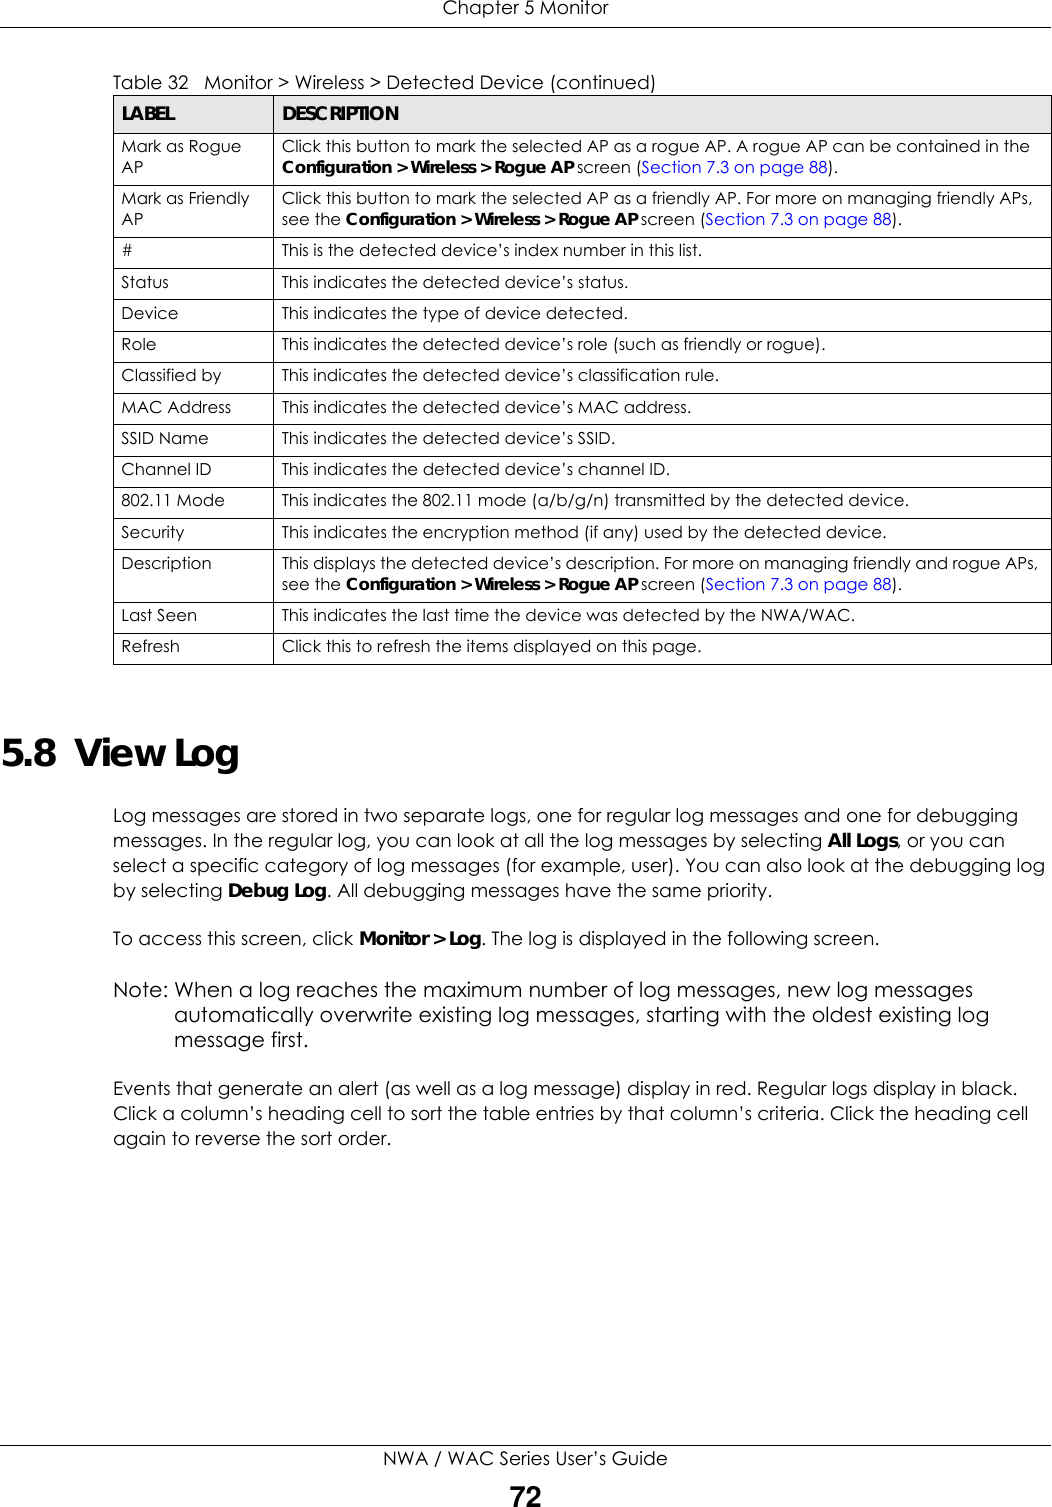 Chapter 5 MonitorNWA / WAC Series User’s Guide725.8  View LogLog messages are stored in two separate logs, one for regular log messages and one for debugging messages. In the regular log, you can look at all the log messages by selecting All Logs, or you can select a specific category of log messages (for example, user). You can also look at the debugging log by selecting Debug Log. All debugging messages have the same priority. To access this screen, click Monitor &gt; Log. The log is displayed in the following screen.Note: When a log reaches the maximum number of log messages, new log messages automatically overwrite existing log messages, starting with the oldest existing log message first.Events that generate an alert (as well as a log message) display in red. Regular logs display in black. Click a column’s heading cell to sort the table entries by that column’s criteria. Click the heading cell again to reverse the sort order.Mark as Rogue APClick this button to mark the selected AP as a rogue AP. A rogue AP can be contained in the Configuration &gt; Wireless &gt; Rogue AP screen (Section 7.3 on page 88).Mark as Friendly APClick this button to mark the selected AP as a friendly AP. For more on managing friendly APs, see the Configuration &gt; Wireless &gt; Rogue AP screen (Section 7.3 on page 88).# This is the detected device’s index number in this list.Status This indicates the detected device’s status.Device This indicates the type of device detected.Role This indicates the detected device’s role (such as friendly or rogue).Classified by This indicates the detected device’s classification rule.MAC Address This indicates the detected device’s MAC address.SSID Name This indicates the detected device’s SSID.Channel ID This indicates the detected device’s channel ID.802.11 Mode This indicates the 802.11 mode (a/b/g/n) transmitted by the detected device.Security This indicates the encryption method (if any) used by the detected device.Description This displays the detected device’s description. For more on managing friendly and rogue APs, see the Configuration &gt; Wireless &gt; Rogue AP screen (Section 7.3 on page 88).Last Seen This indicates the last time the device was detected by the NWA/WAC.Refresh Click this to refresh the items displayed on this page.Table 32   Monitor &gt; Wireless &gt; Detected Device (continued)LABEL DESCRIPTION